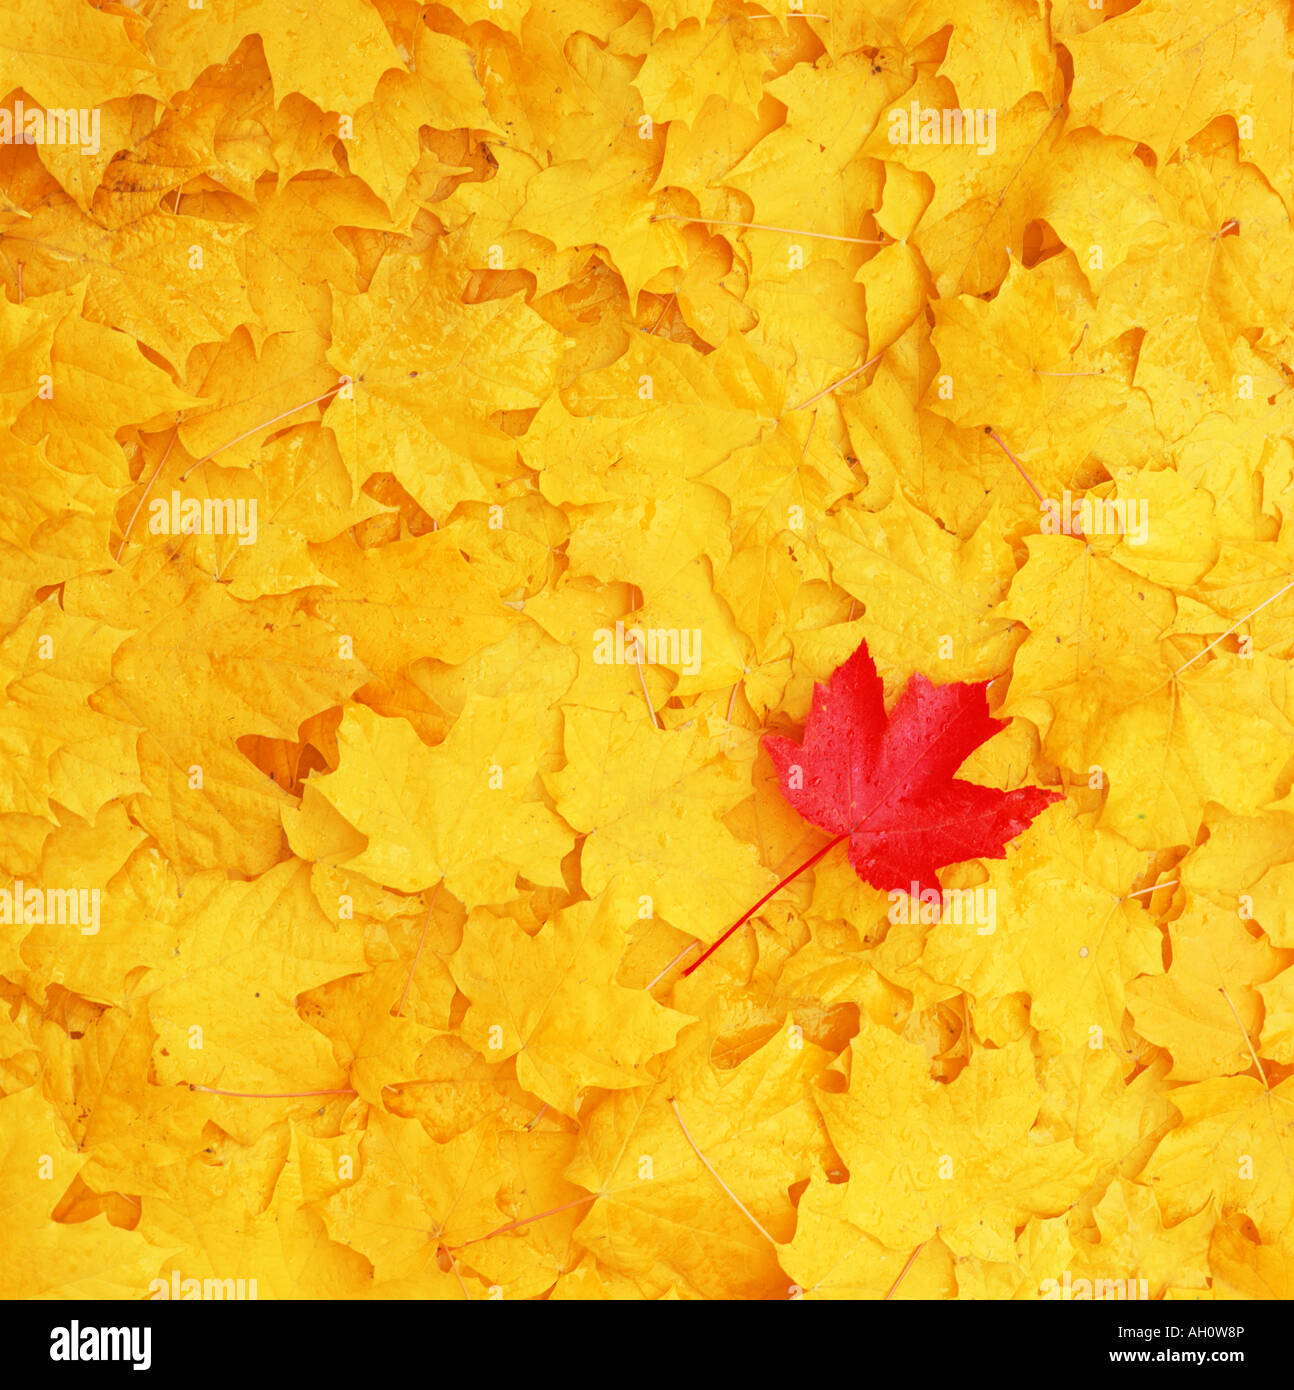 A single red maple leaf on a forest floor of yellow maple leaves shows diversity, color, difference, standout, uncommon nature. Stock Photo